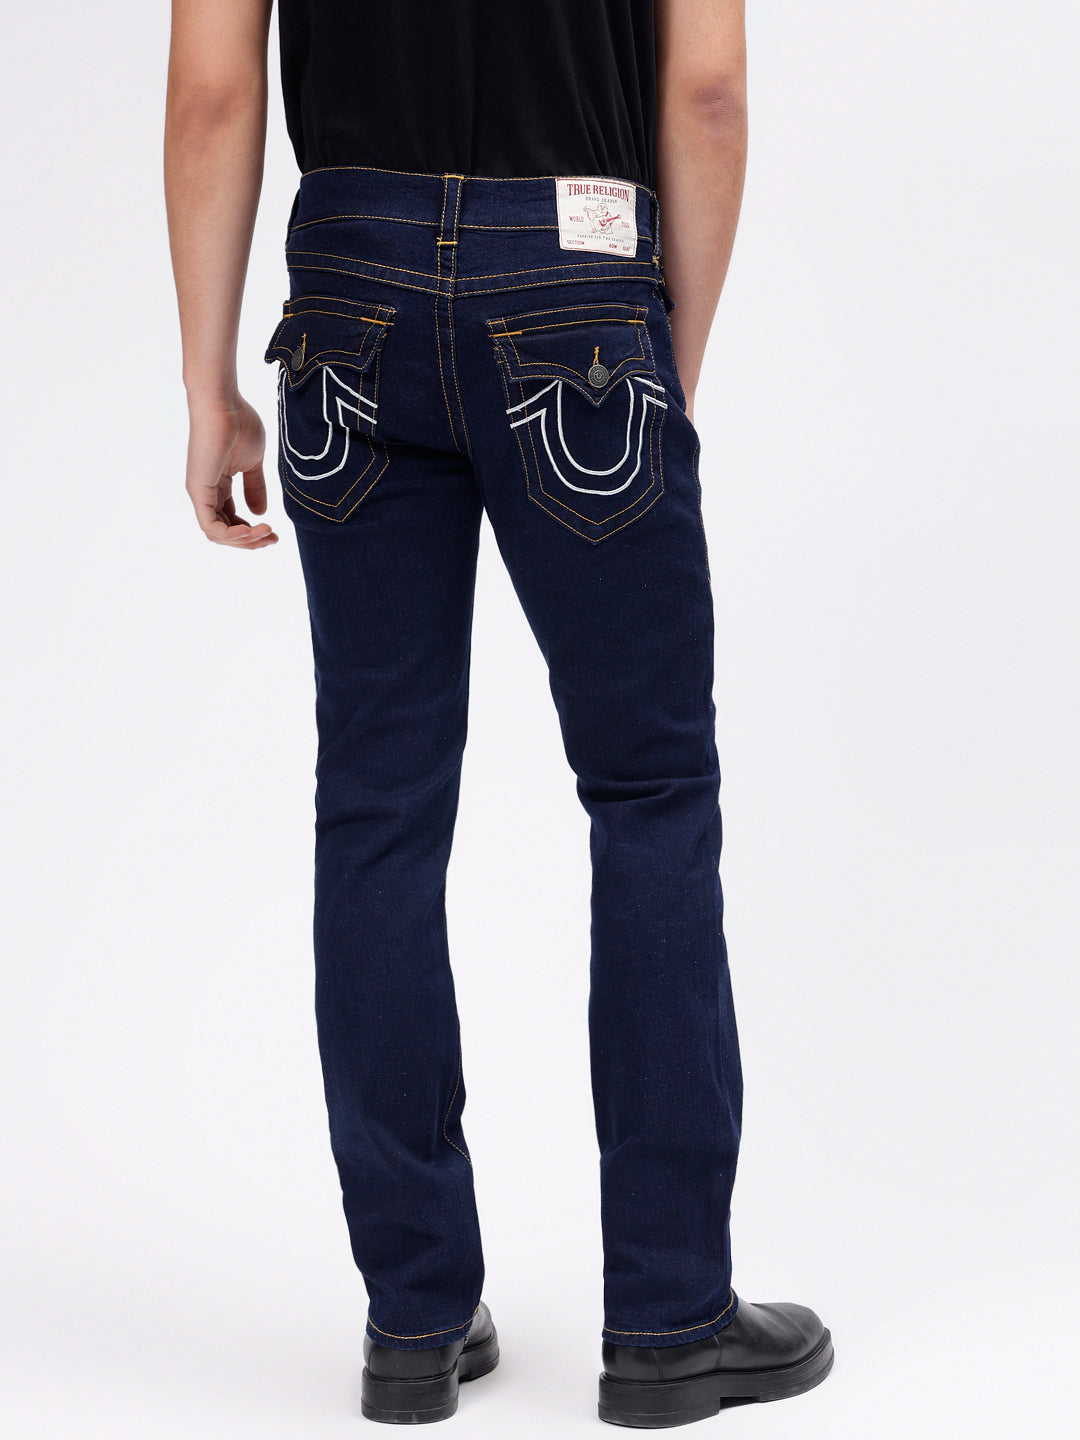 Buy Ricky Super T Jean Men's Jeans & Pants from True Religion. Find True  Religion fashion & more at DrJays.com